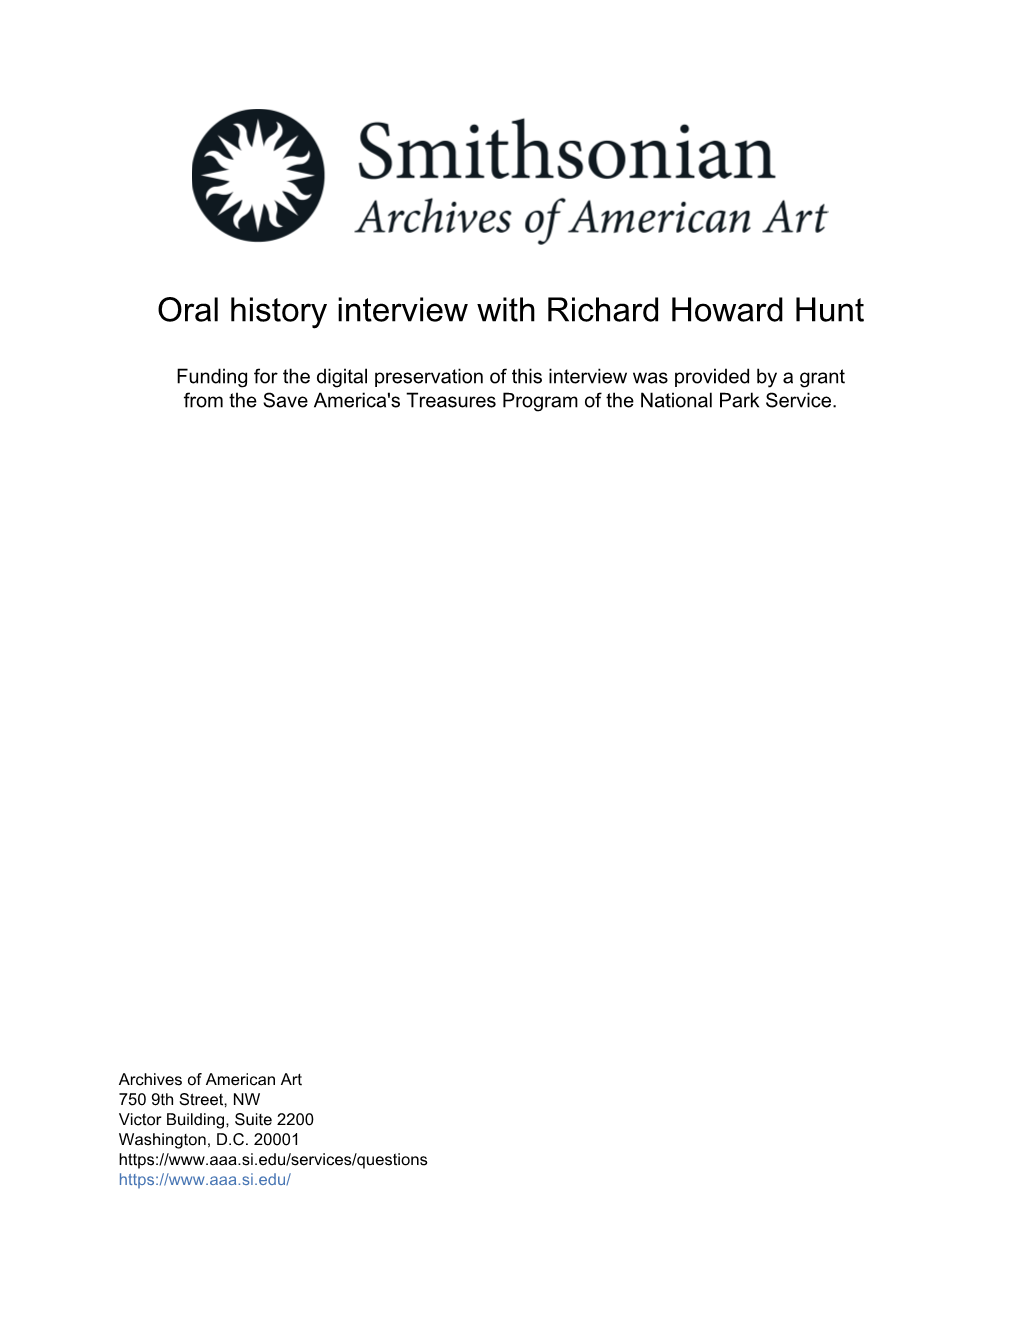 Oral History Interview with Richard Howard Hunt